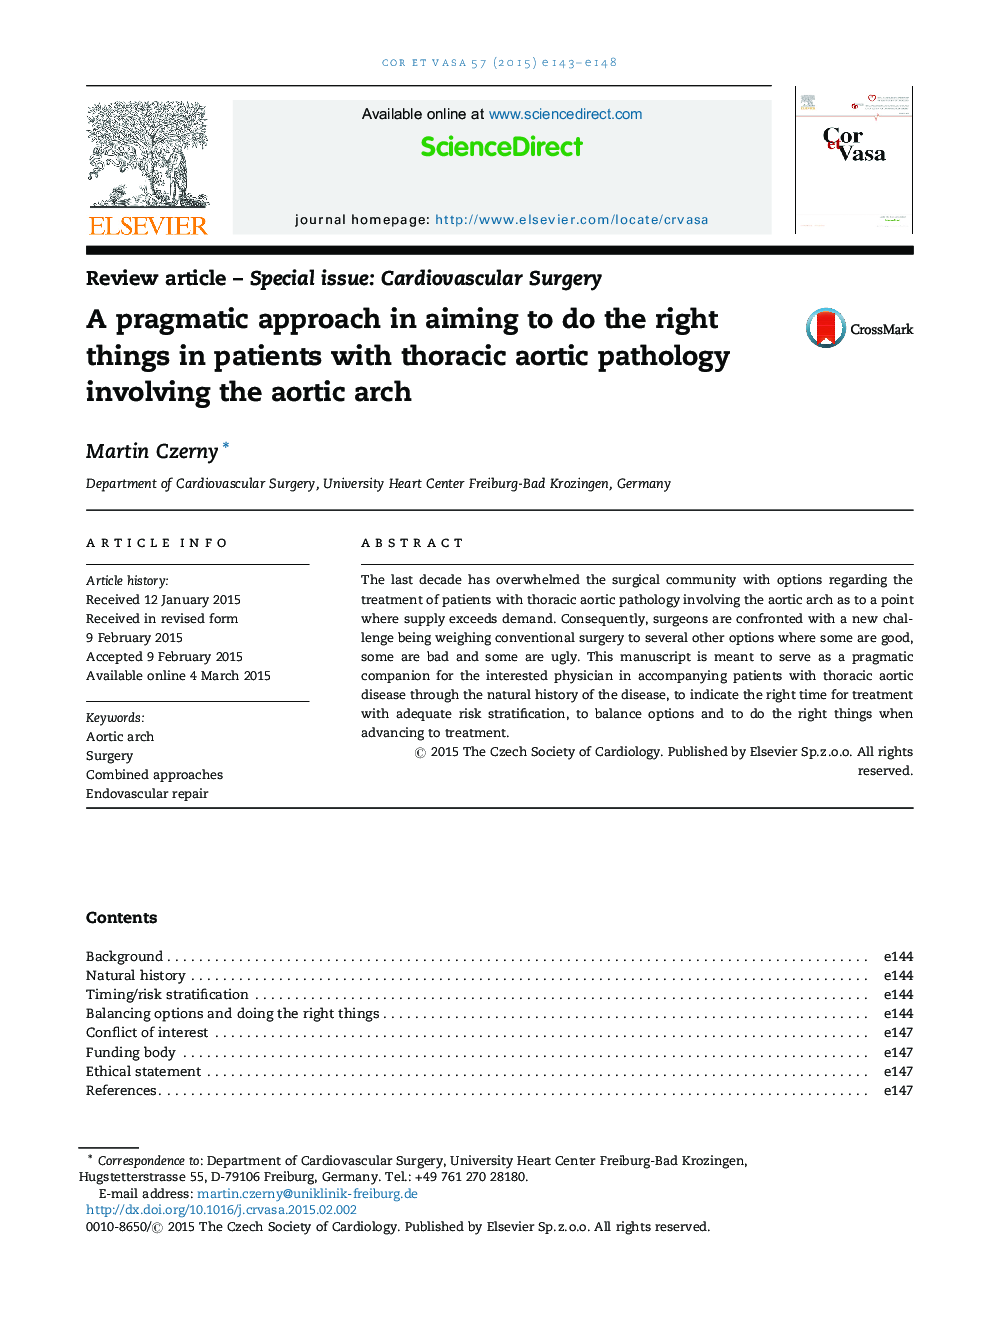 A pragmatic approach in aiming to do the right things in patients with thoracic aortic pathology involving the aortic arch